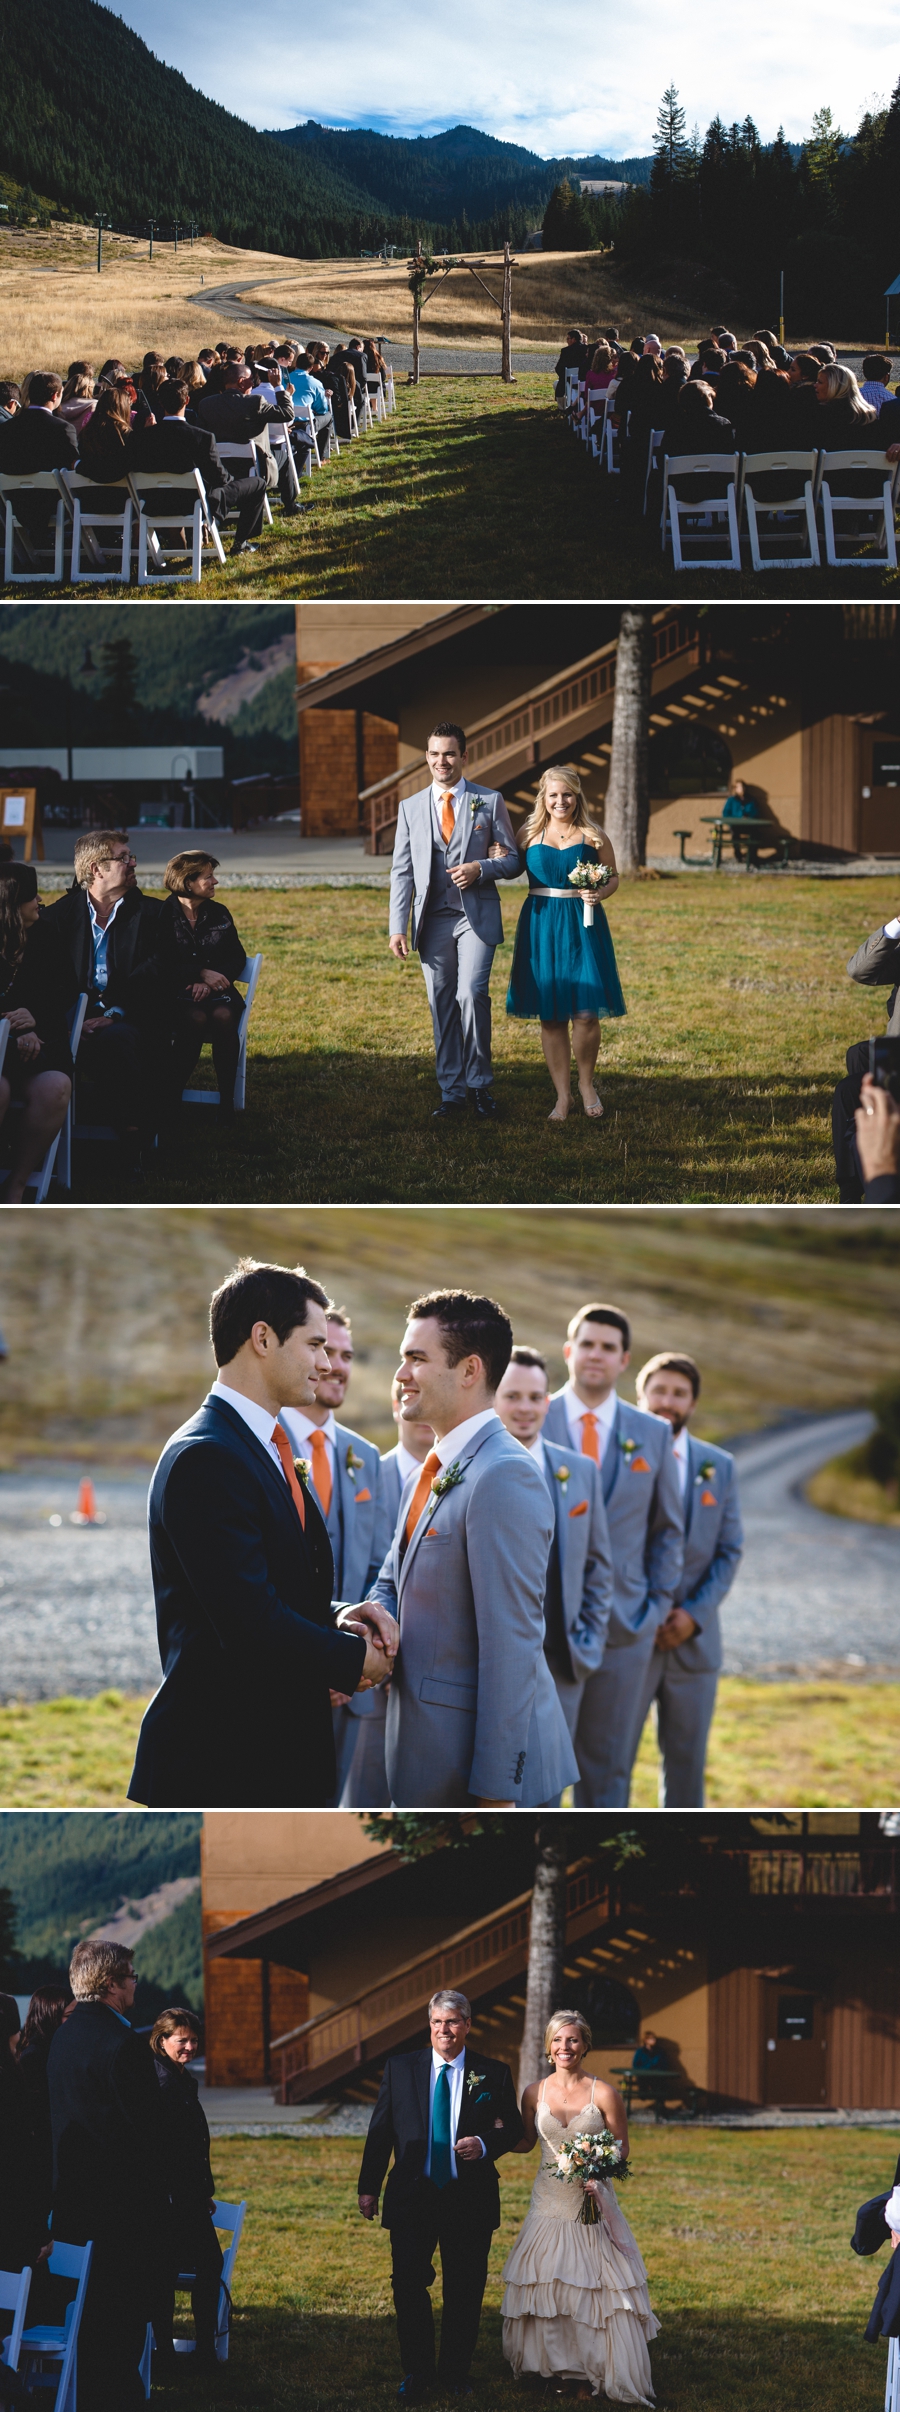 Pacific Northwest Fall Wedding at Crystal Mountain - Photography by Lucas Mobley - Teal Bridesmaids Dresses, Mountain Wedding Party Photos